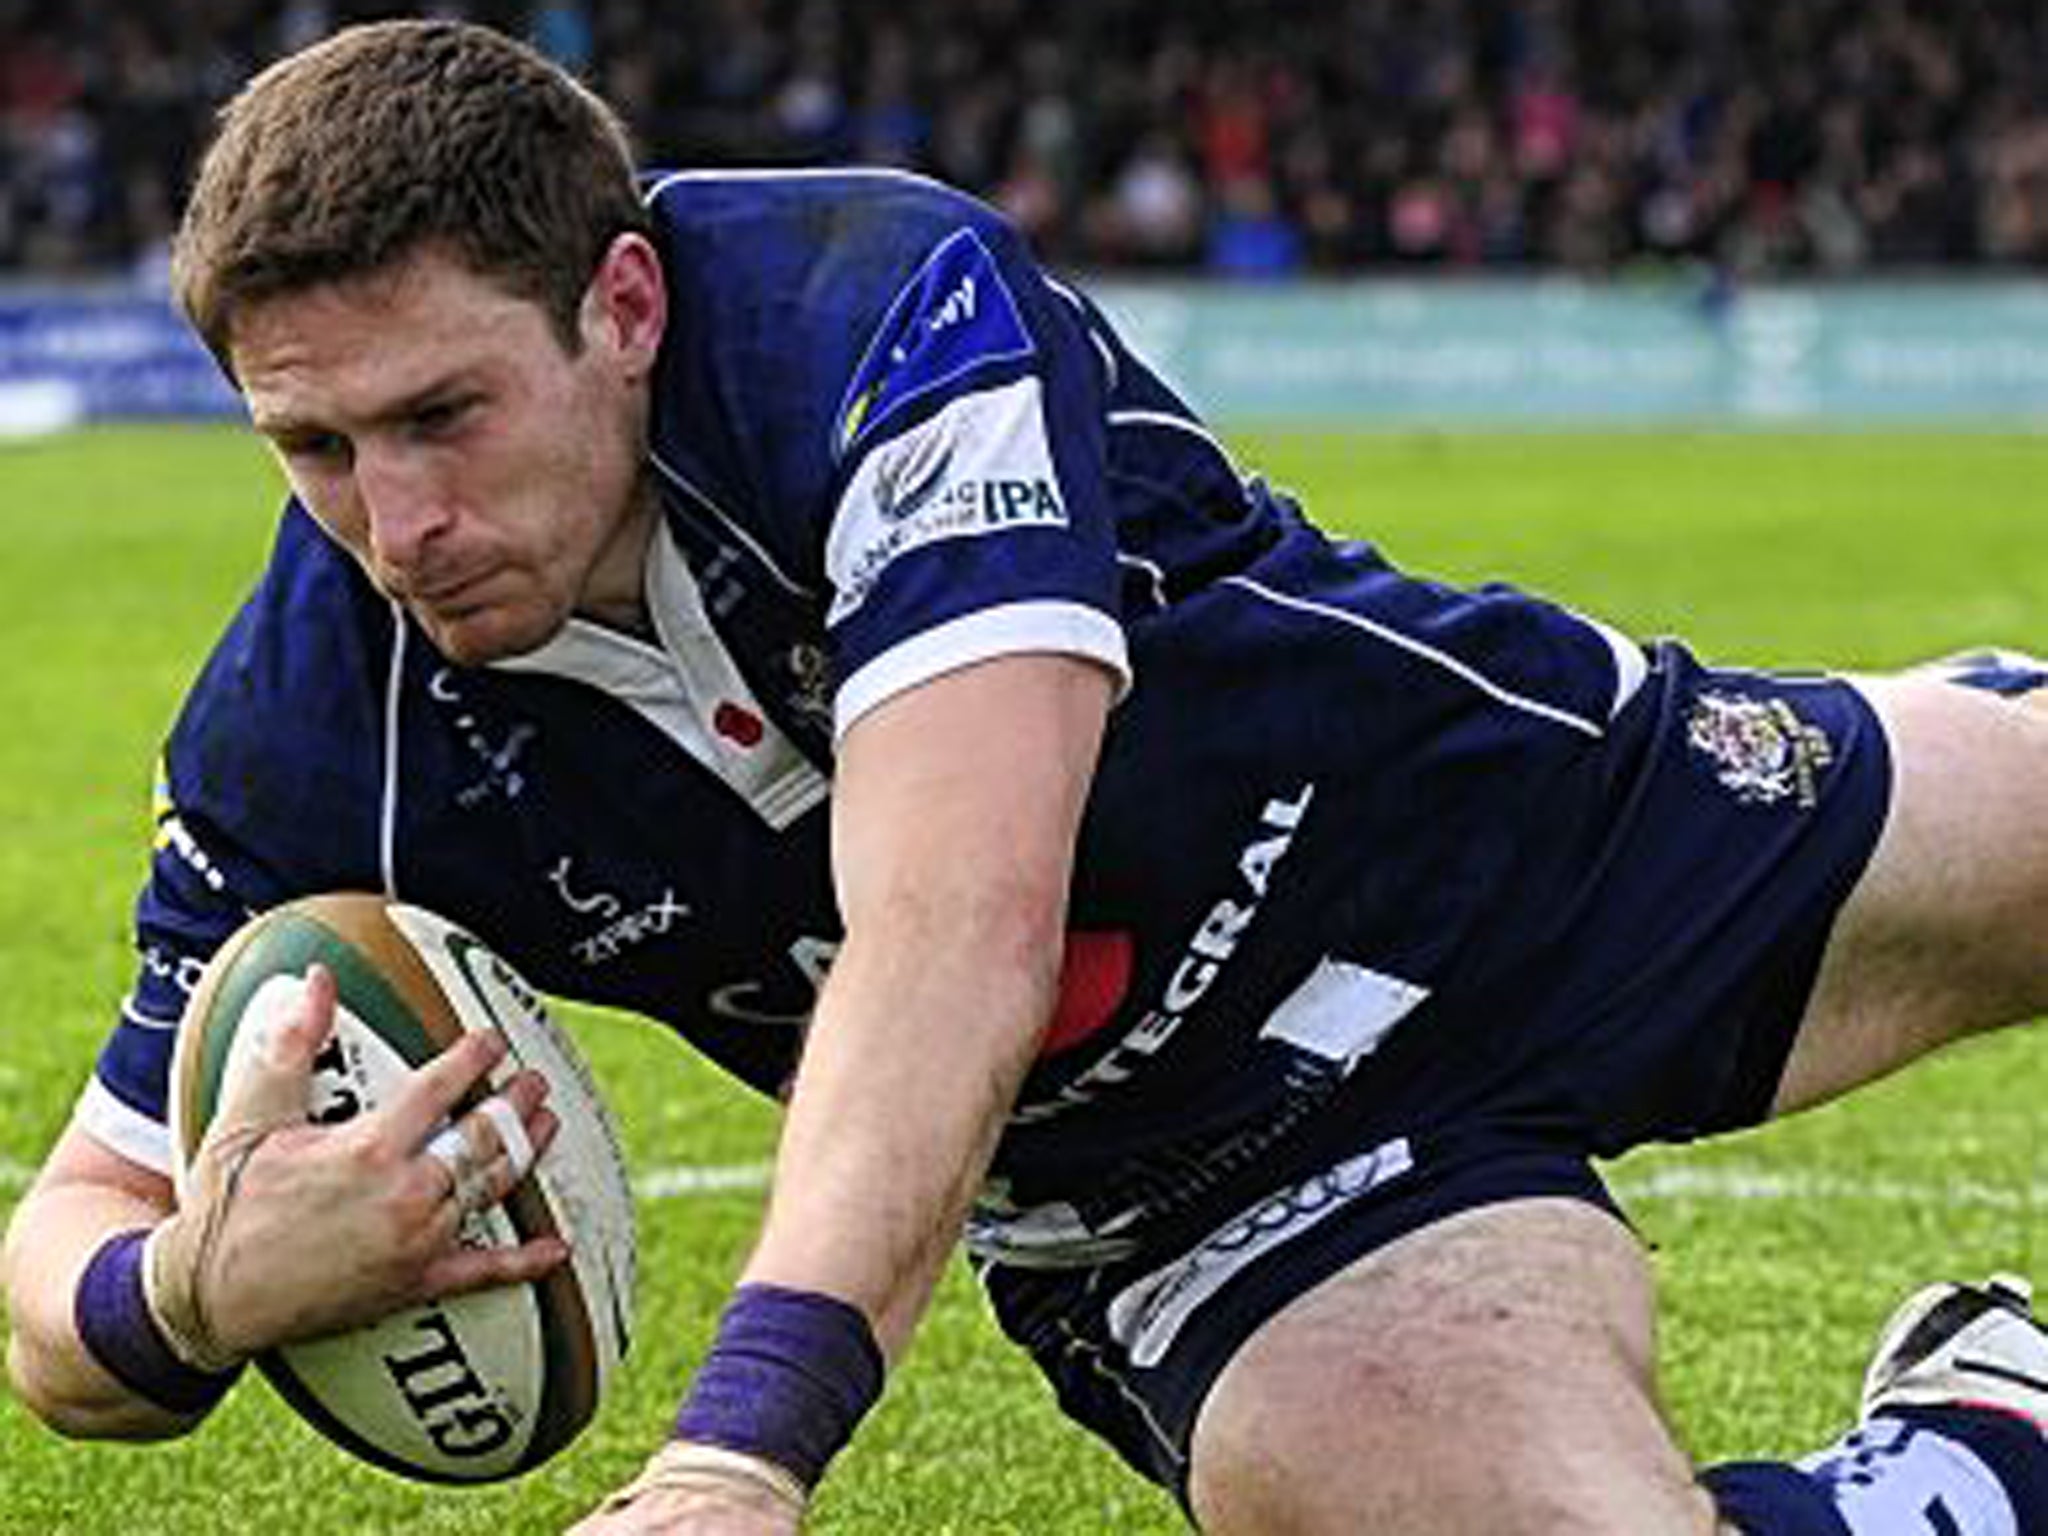 Leading man: Luke Eaves scores Bristol’s first try in their 17-14 win